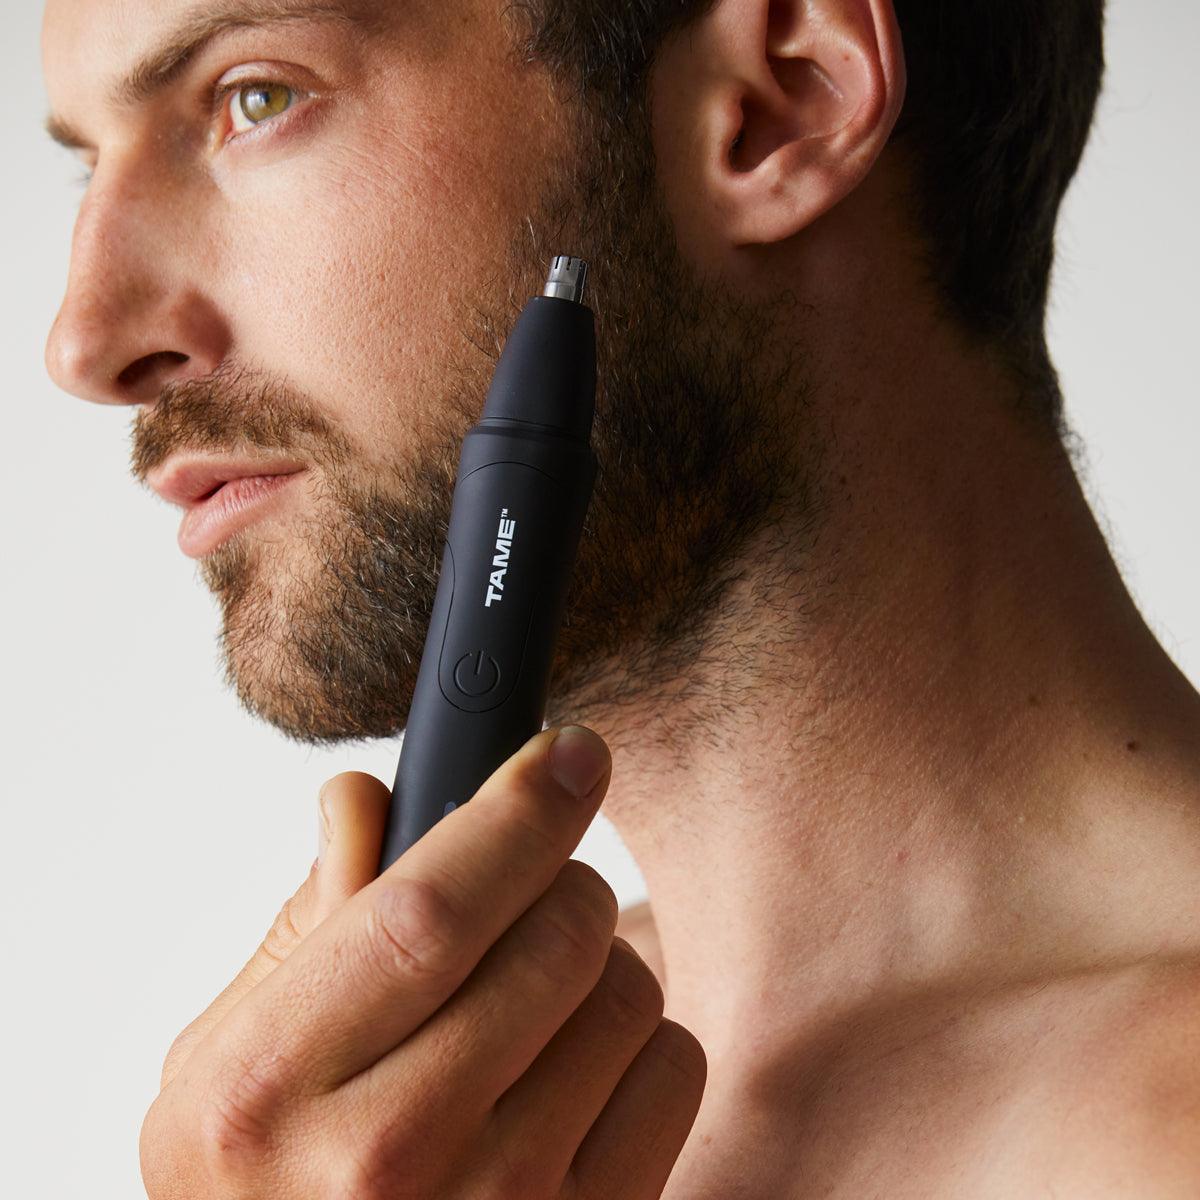 6 essential manscaping tips - TAME